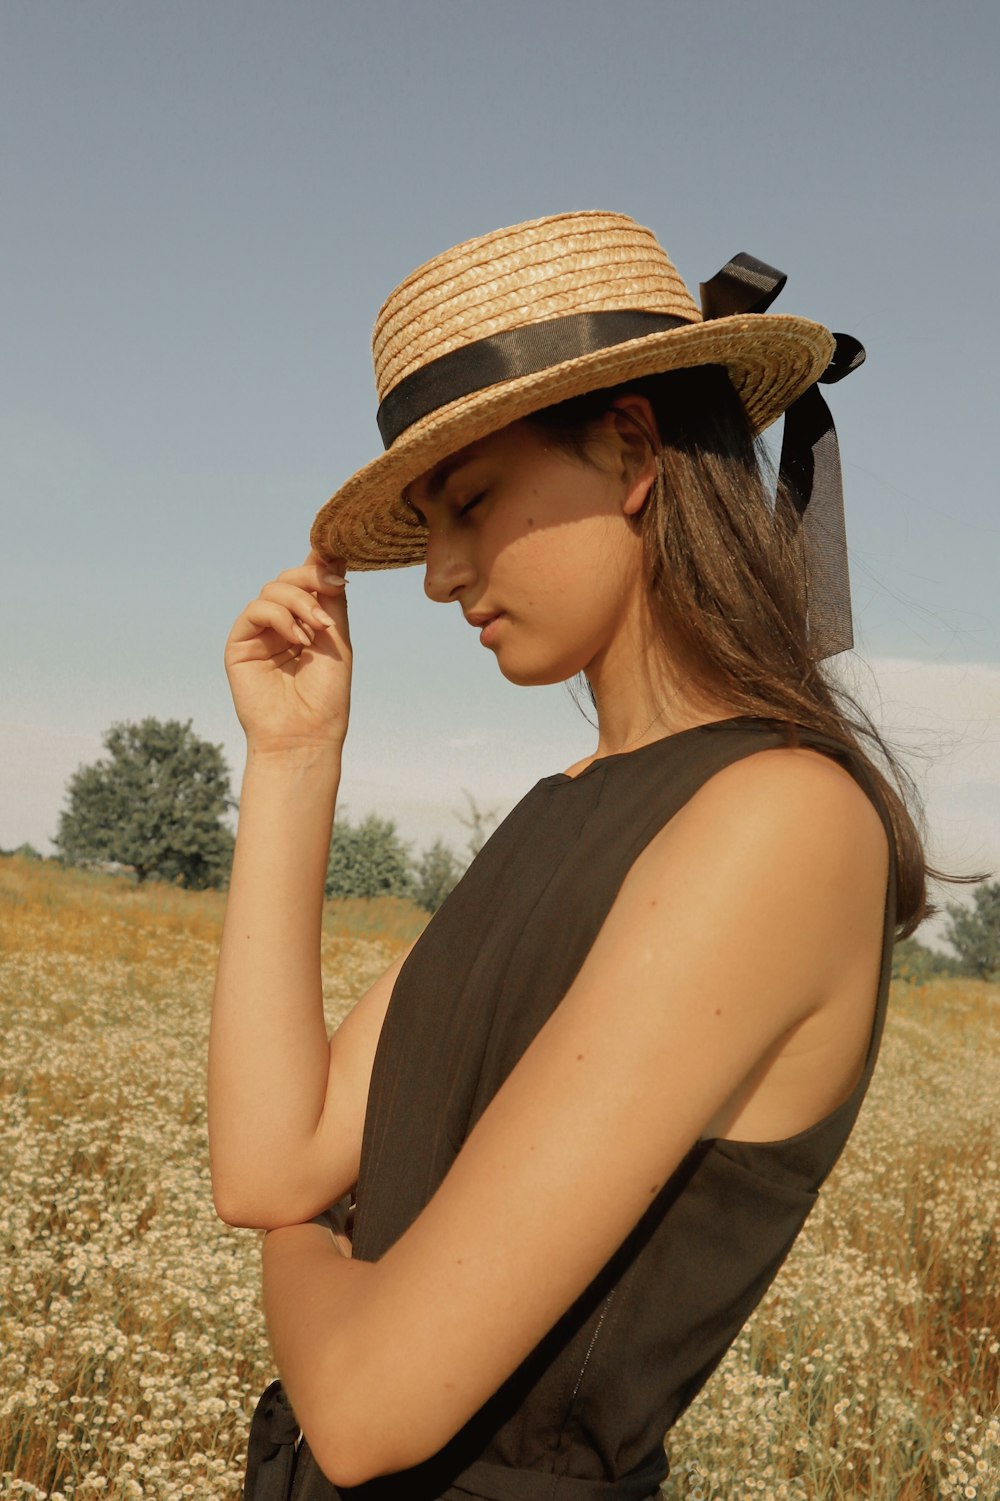 woman in beige and black hat and black sleeveless top